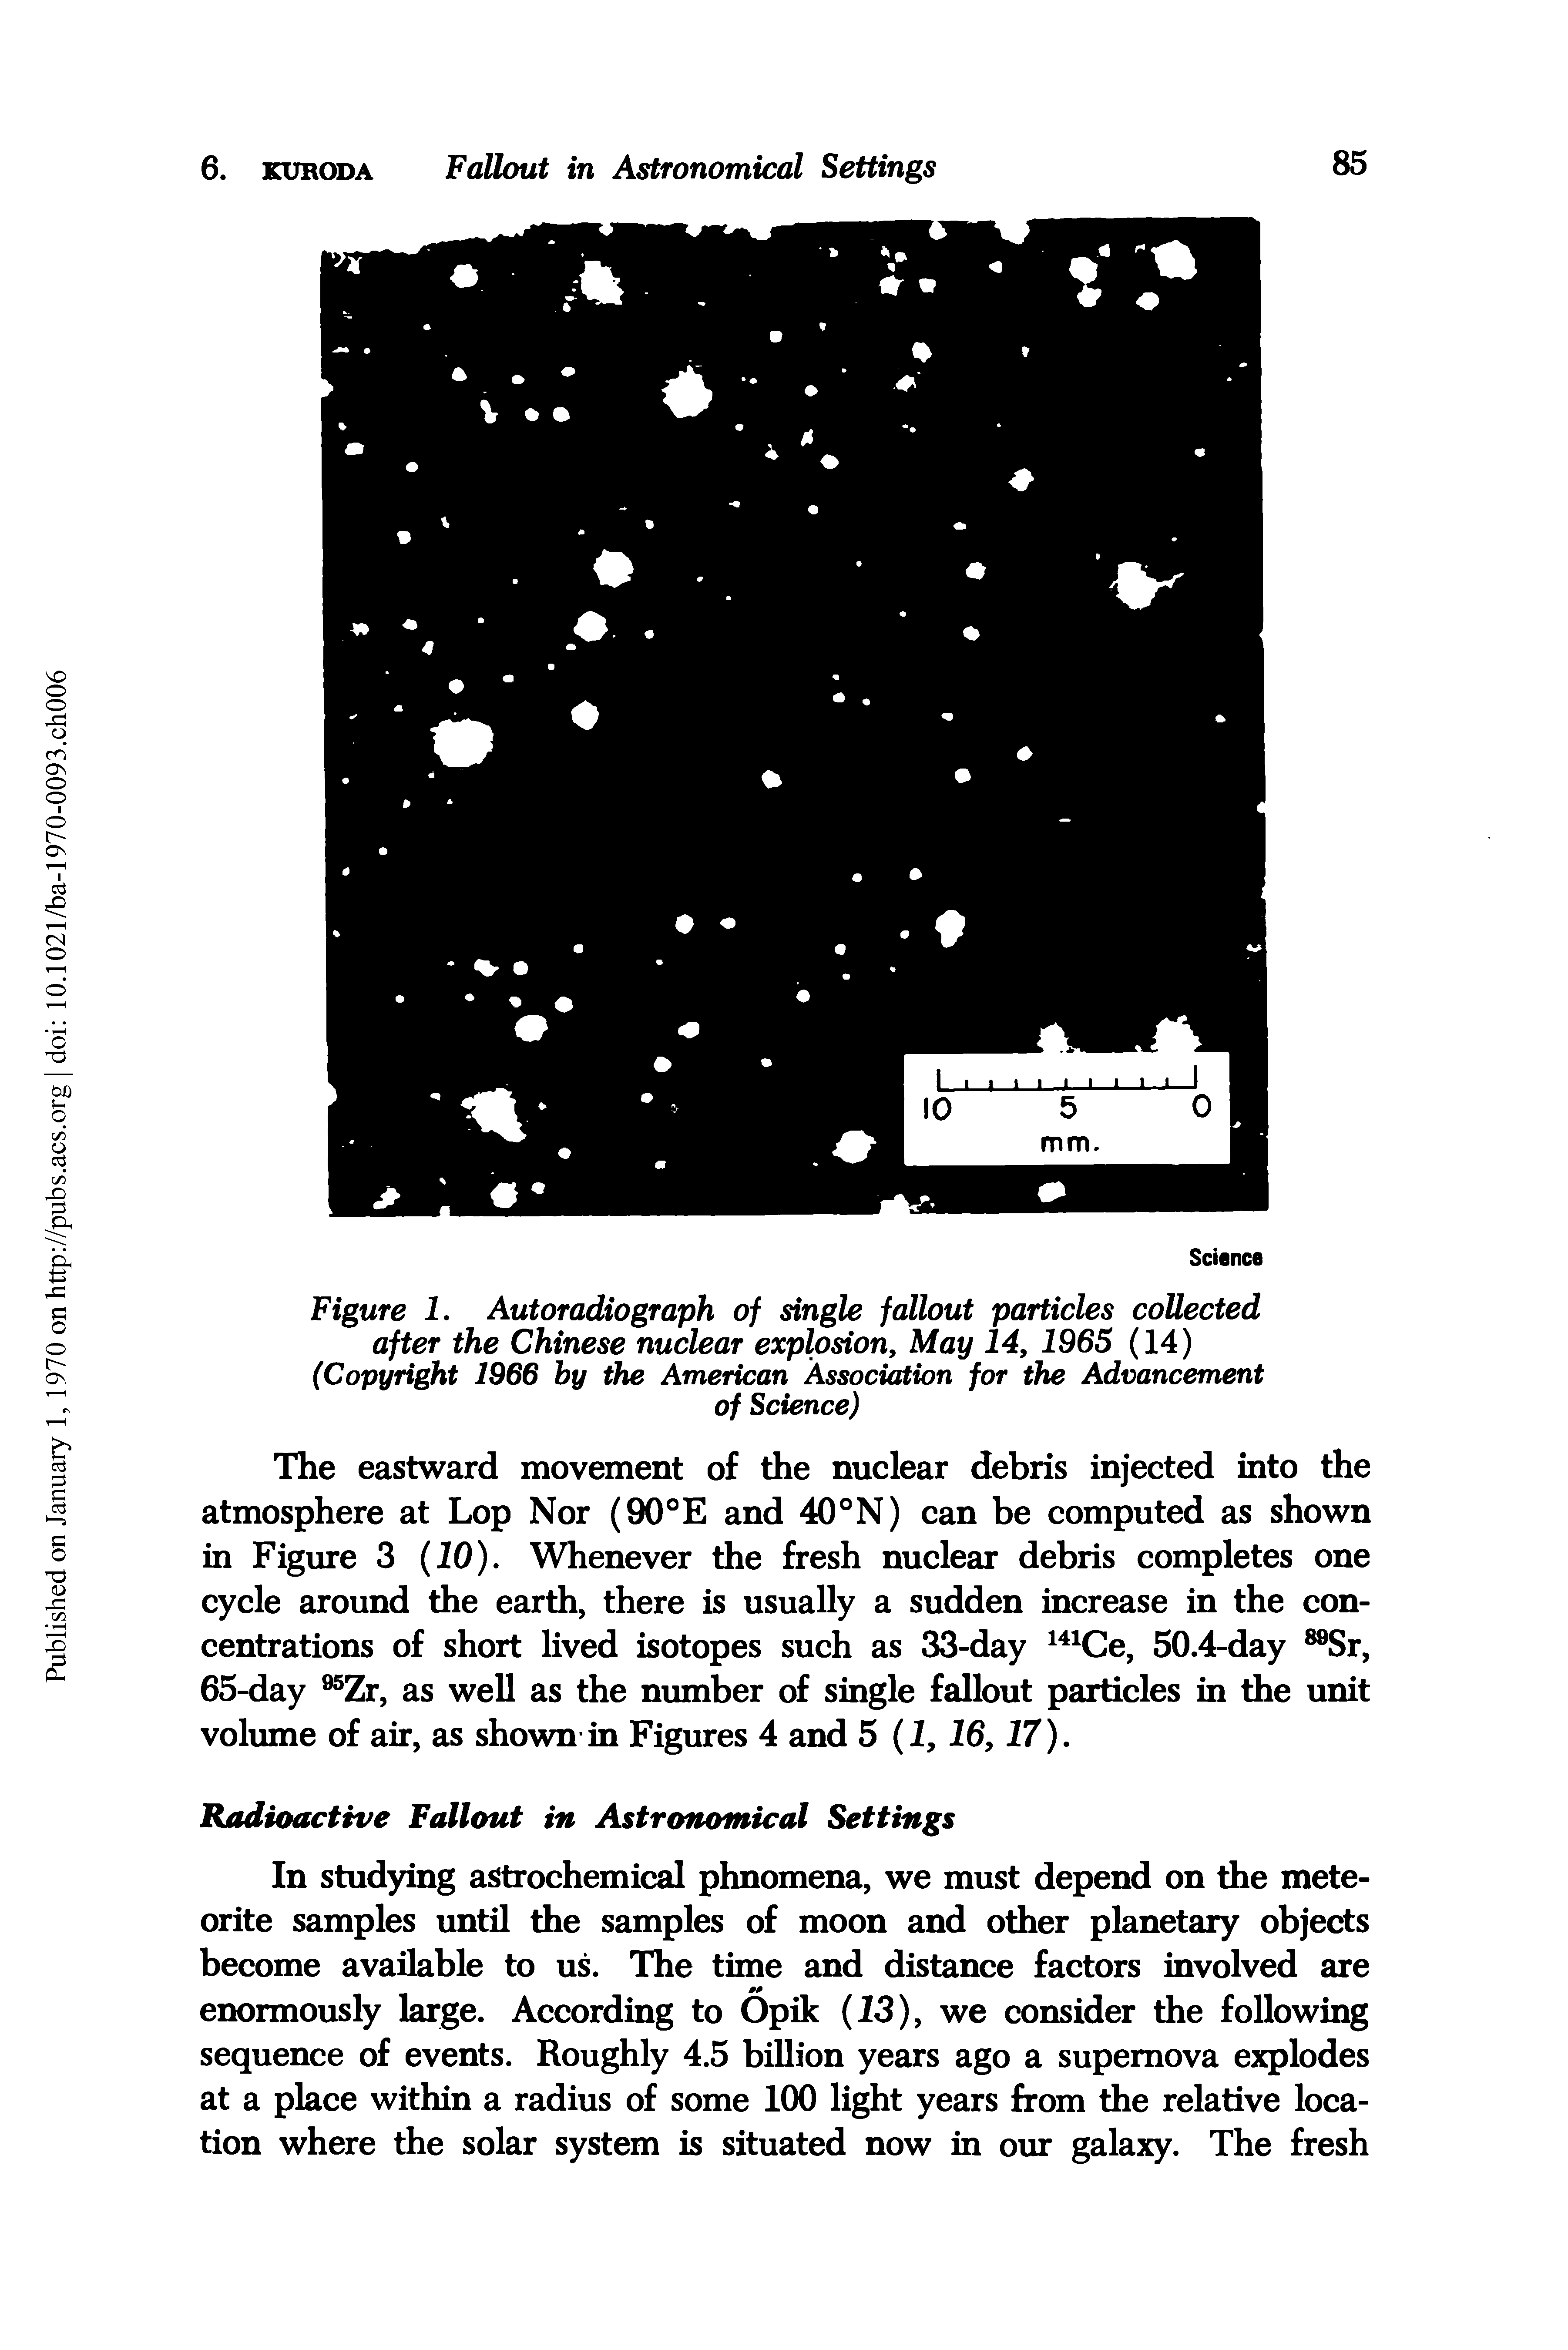 Figure 1. Autoradiograph of single fallout particles collected after the Chinese nuclear explosion, May 14, 1965 (14)...